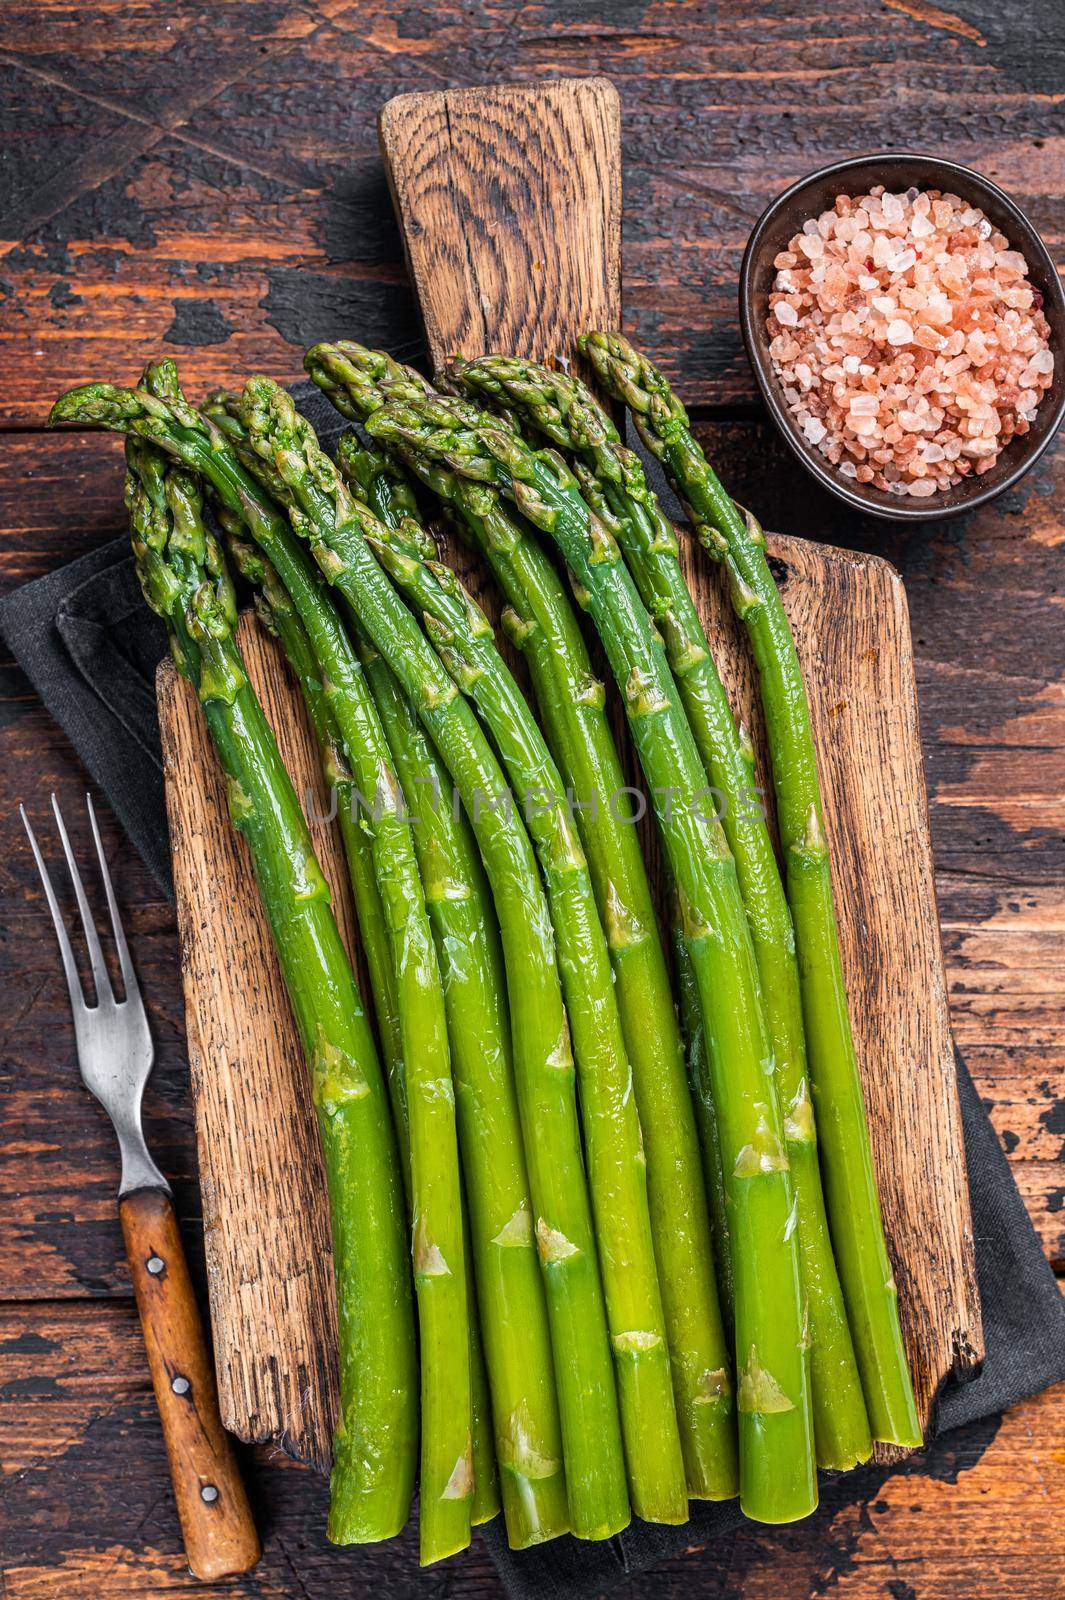 Fresh green asparagus on a wooden cutting board. Dark wooden background. Top view.